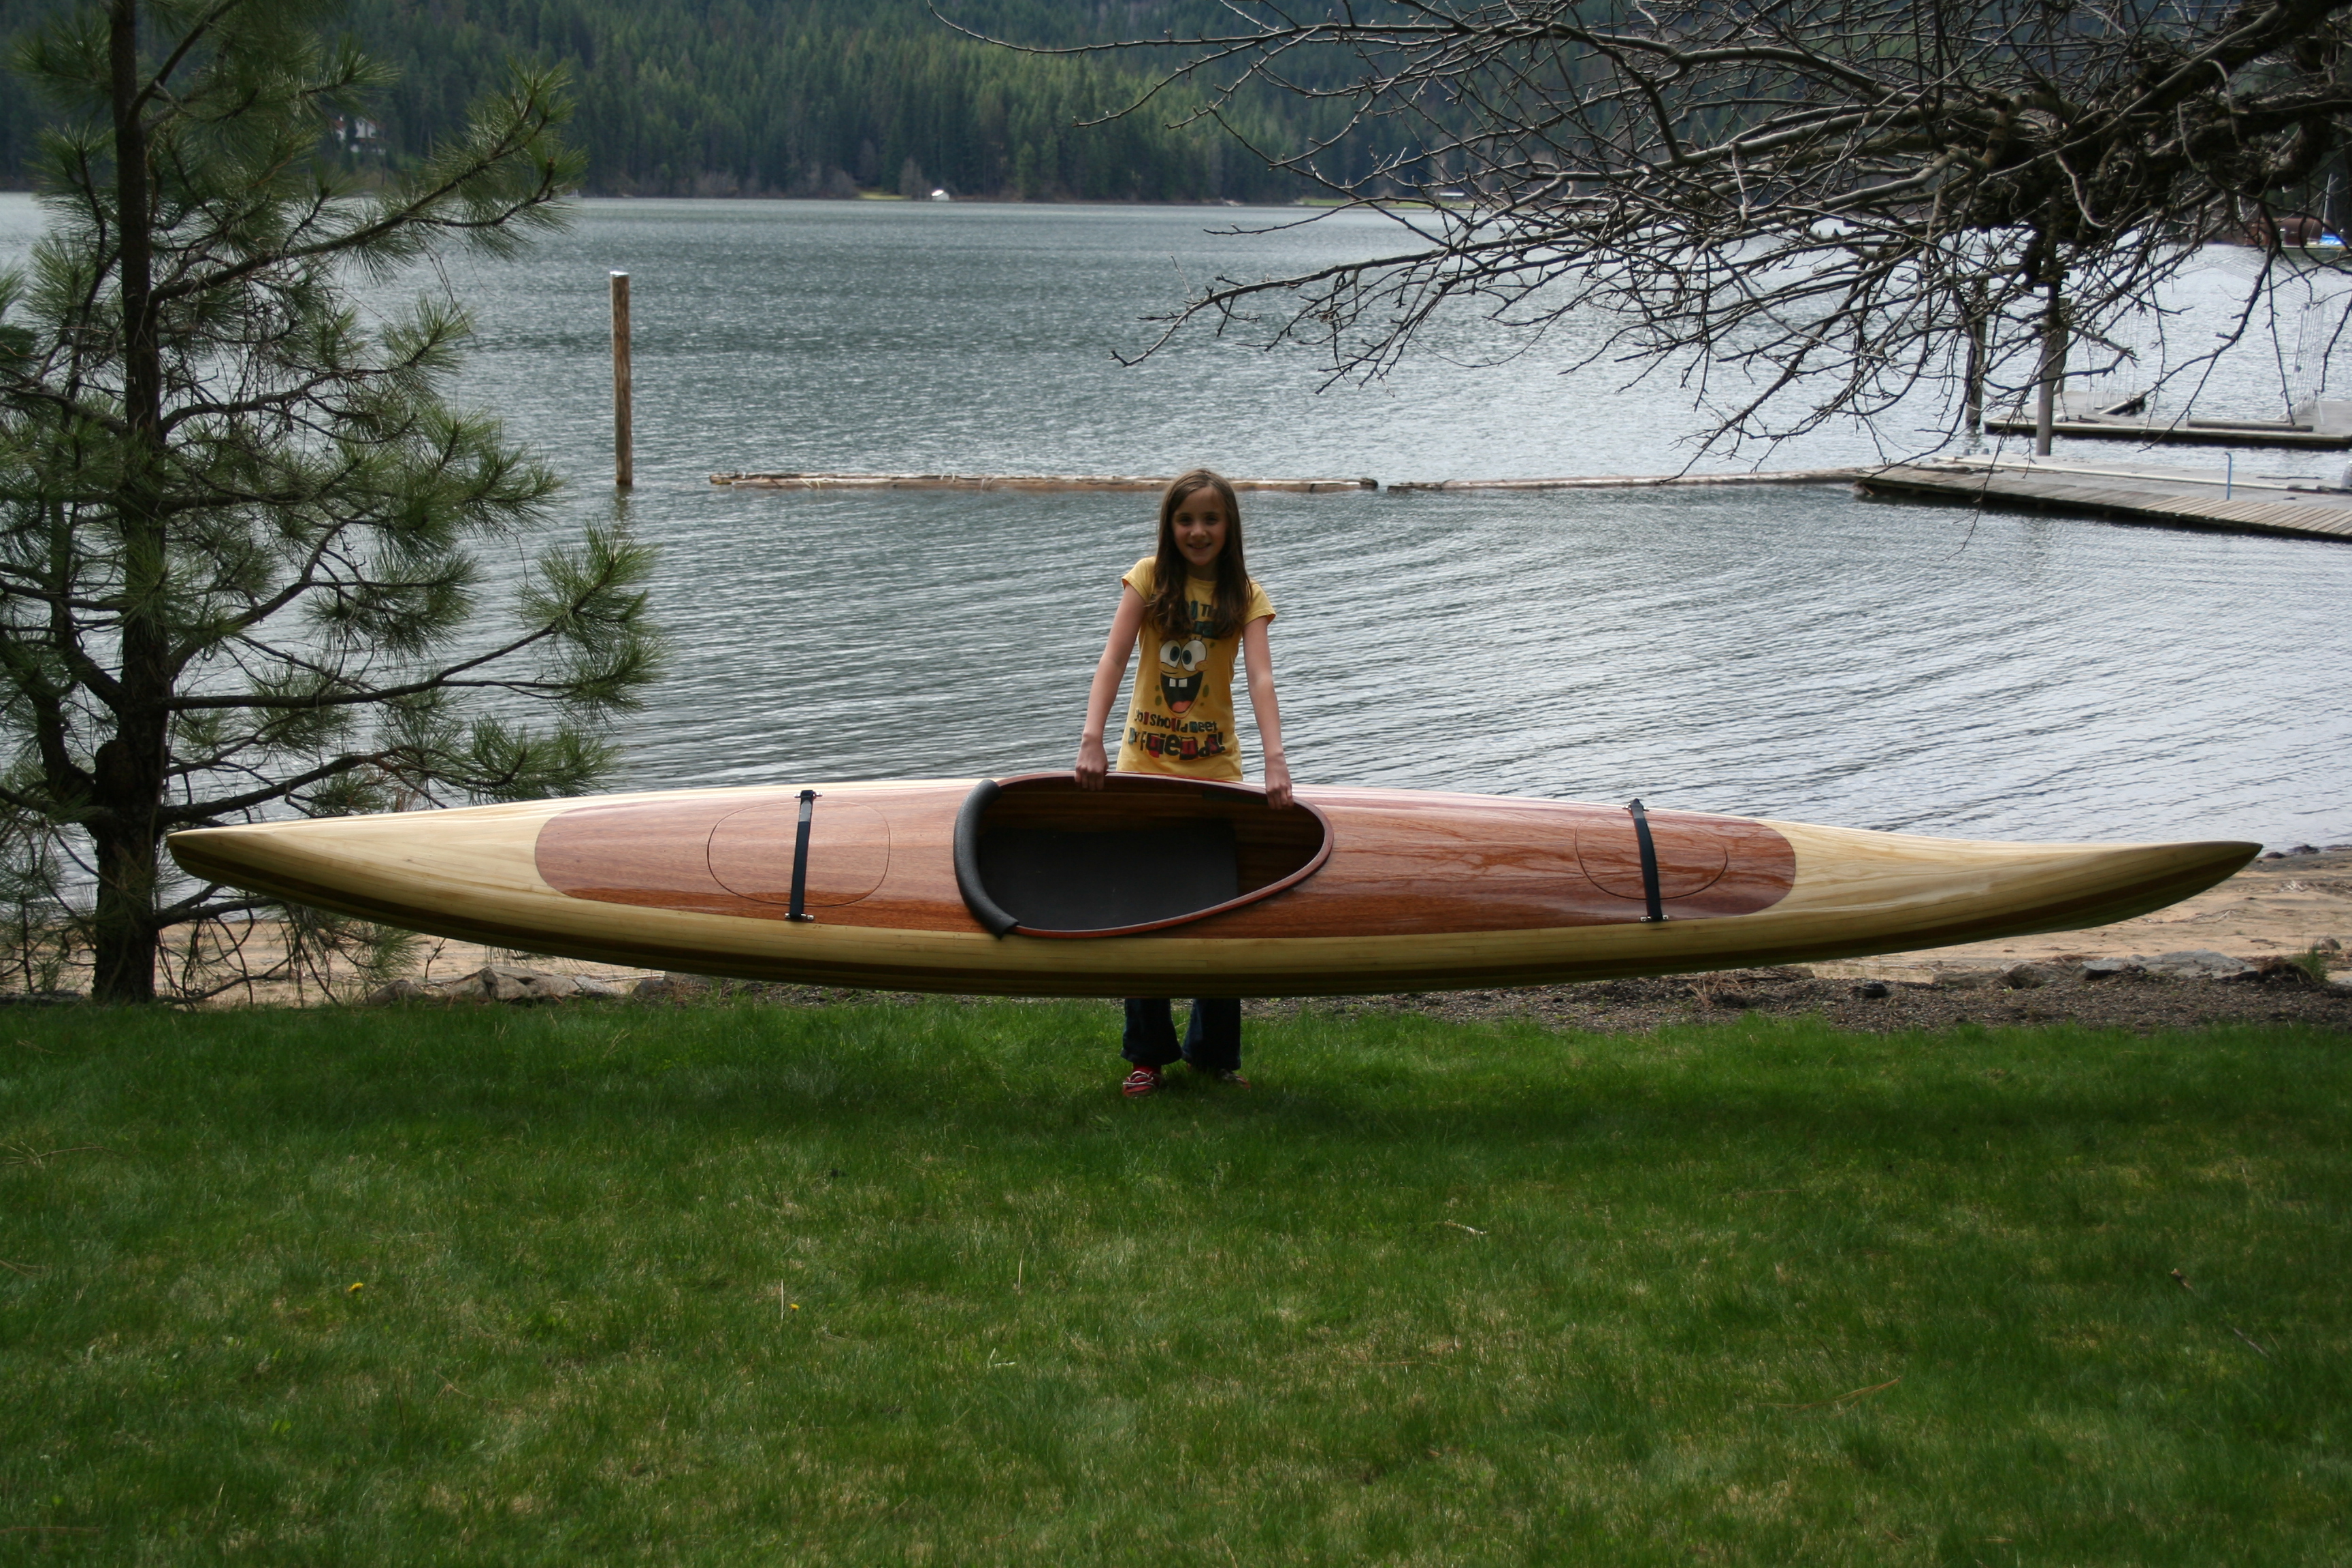 Advertise on Heirloom Kayak and you can be #1 on Google.